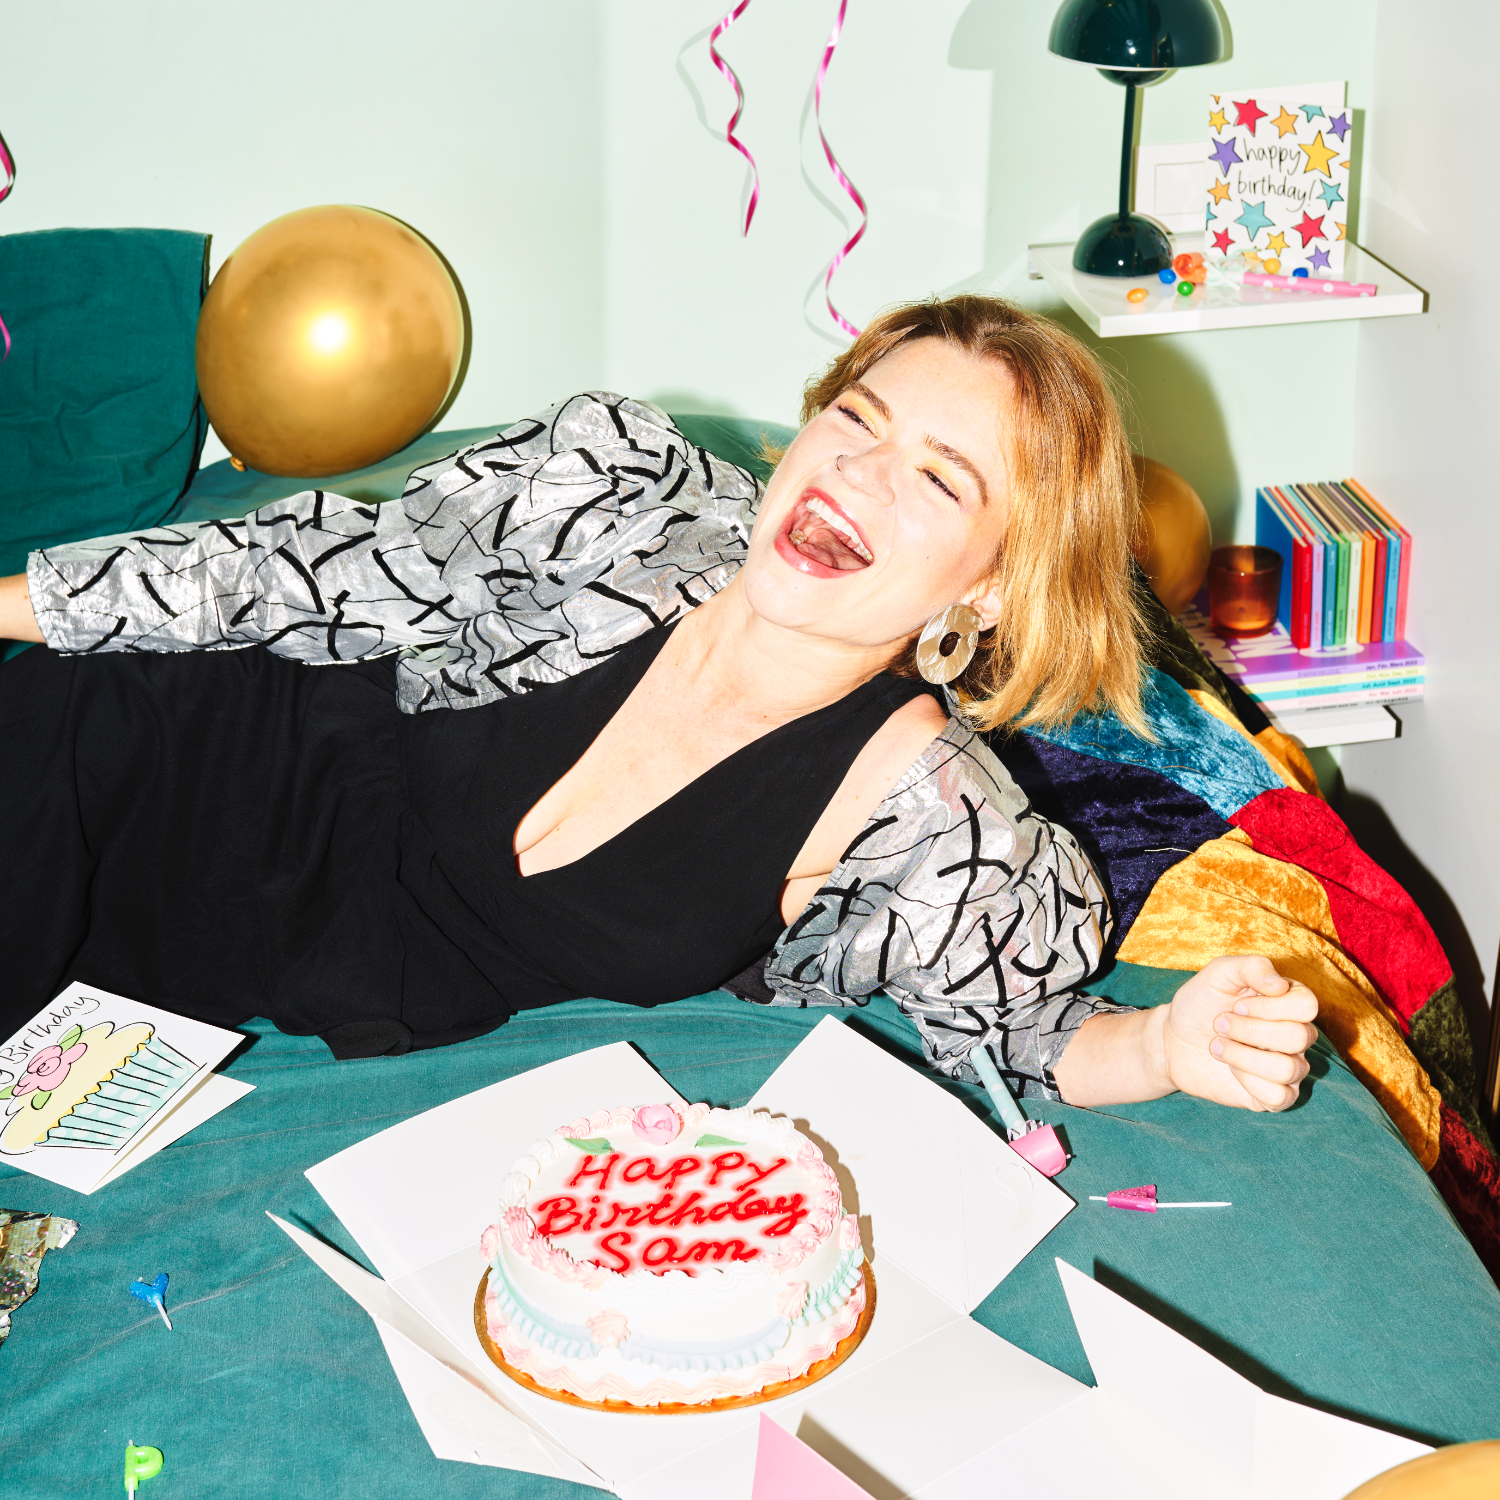 NYC’s Madeline Rhodes champions taking care of yourself in ‘Bailing On Your Birthday’